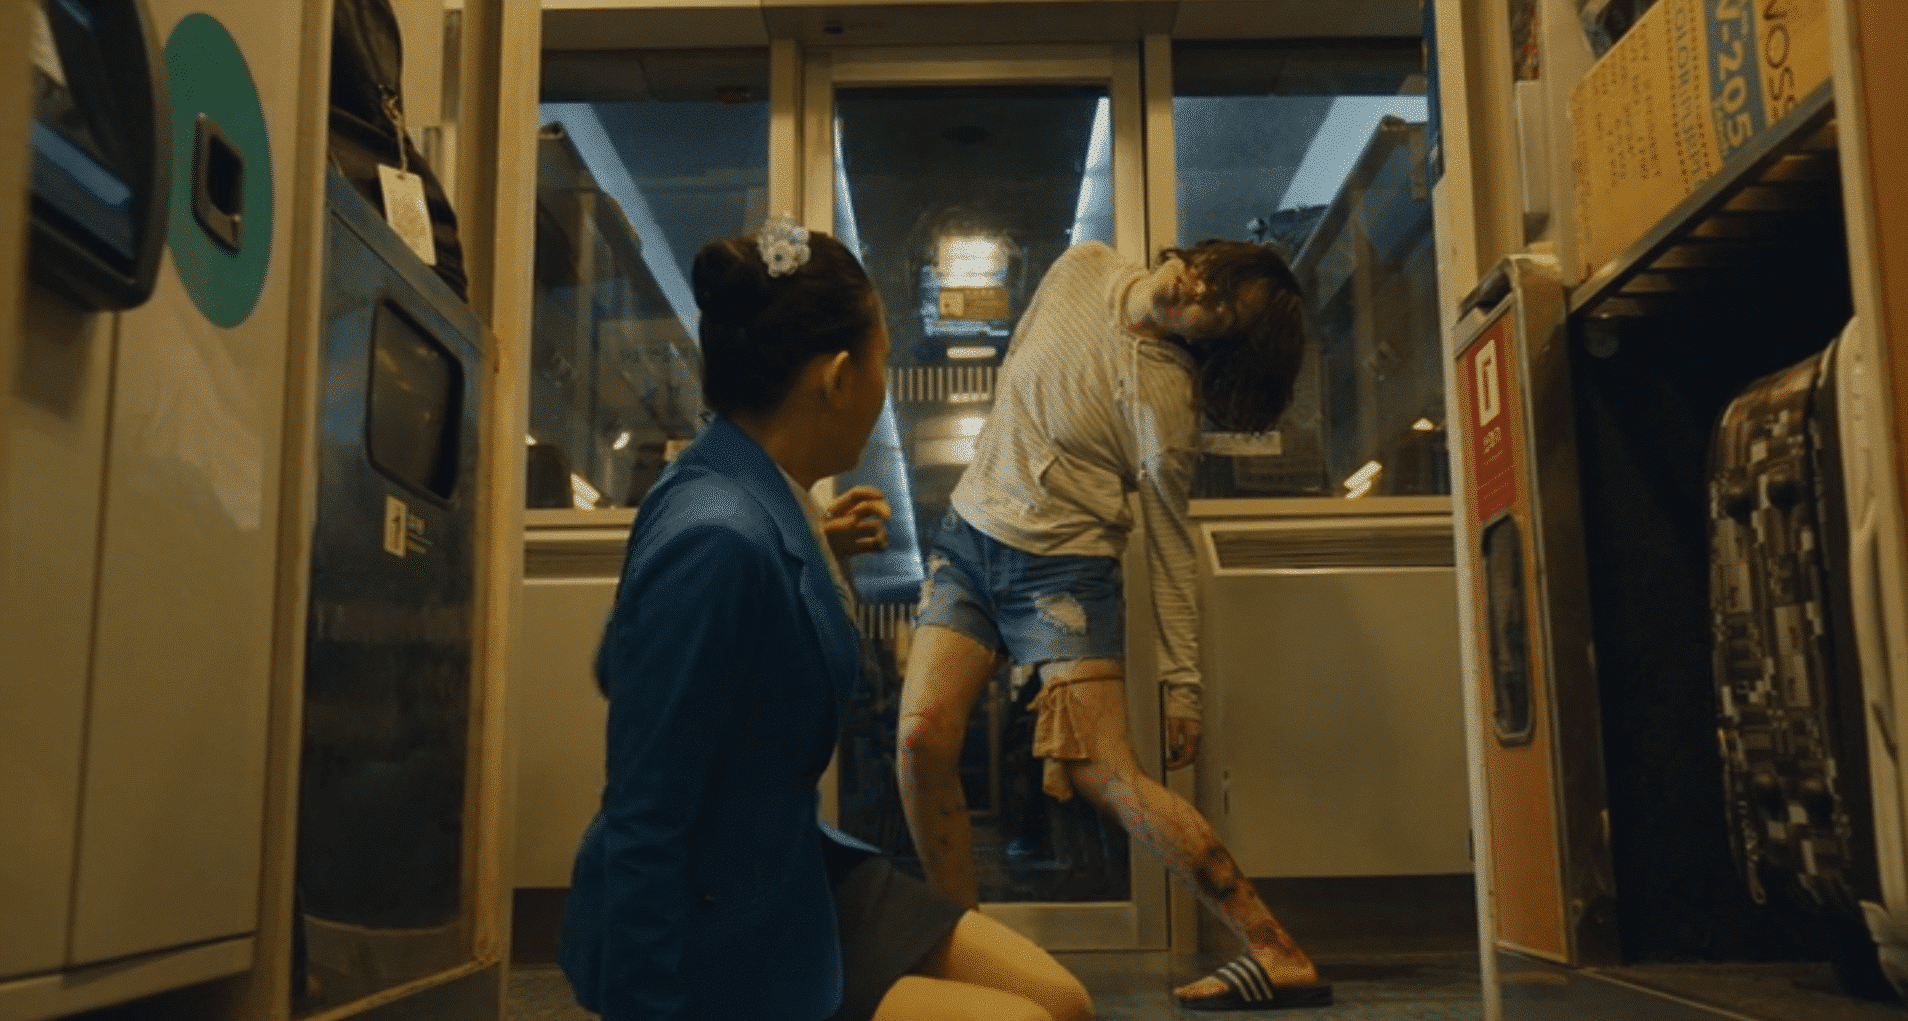 A scene from the movie 'Train to Busan'